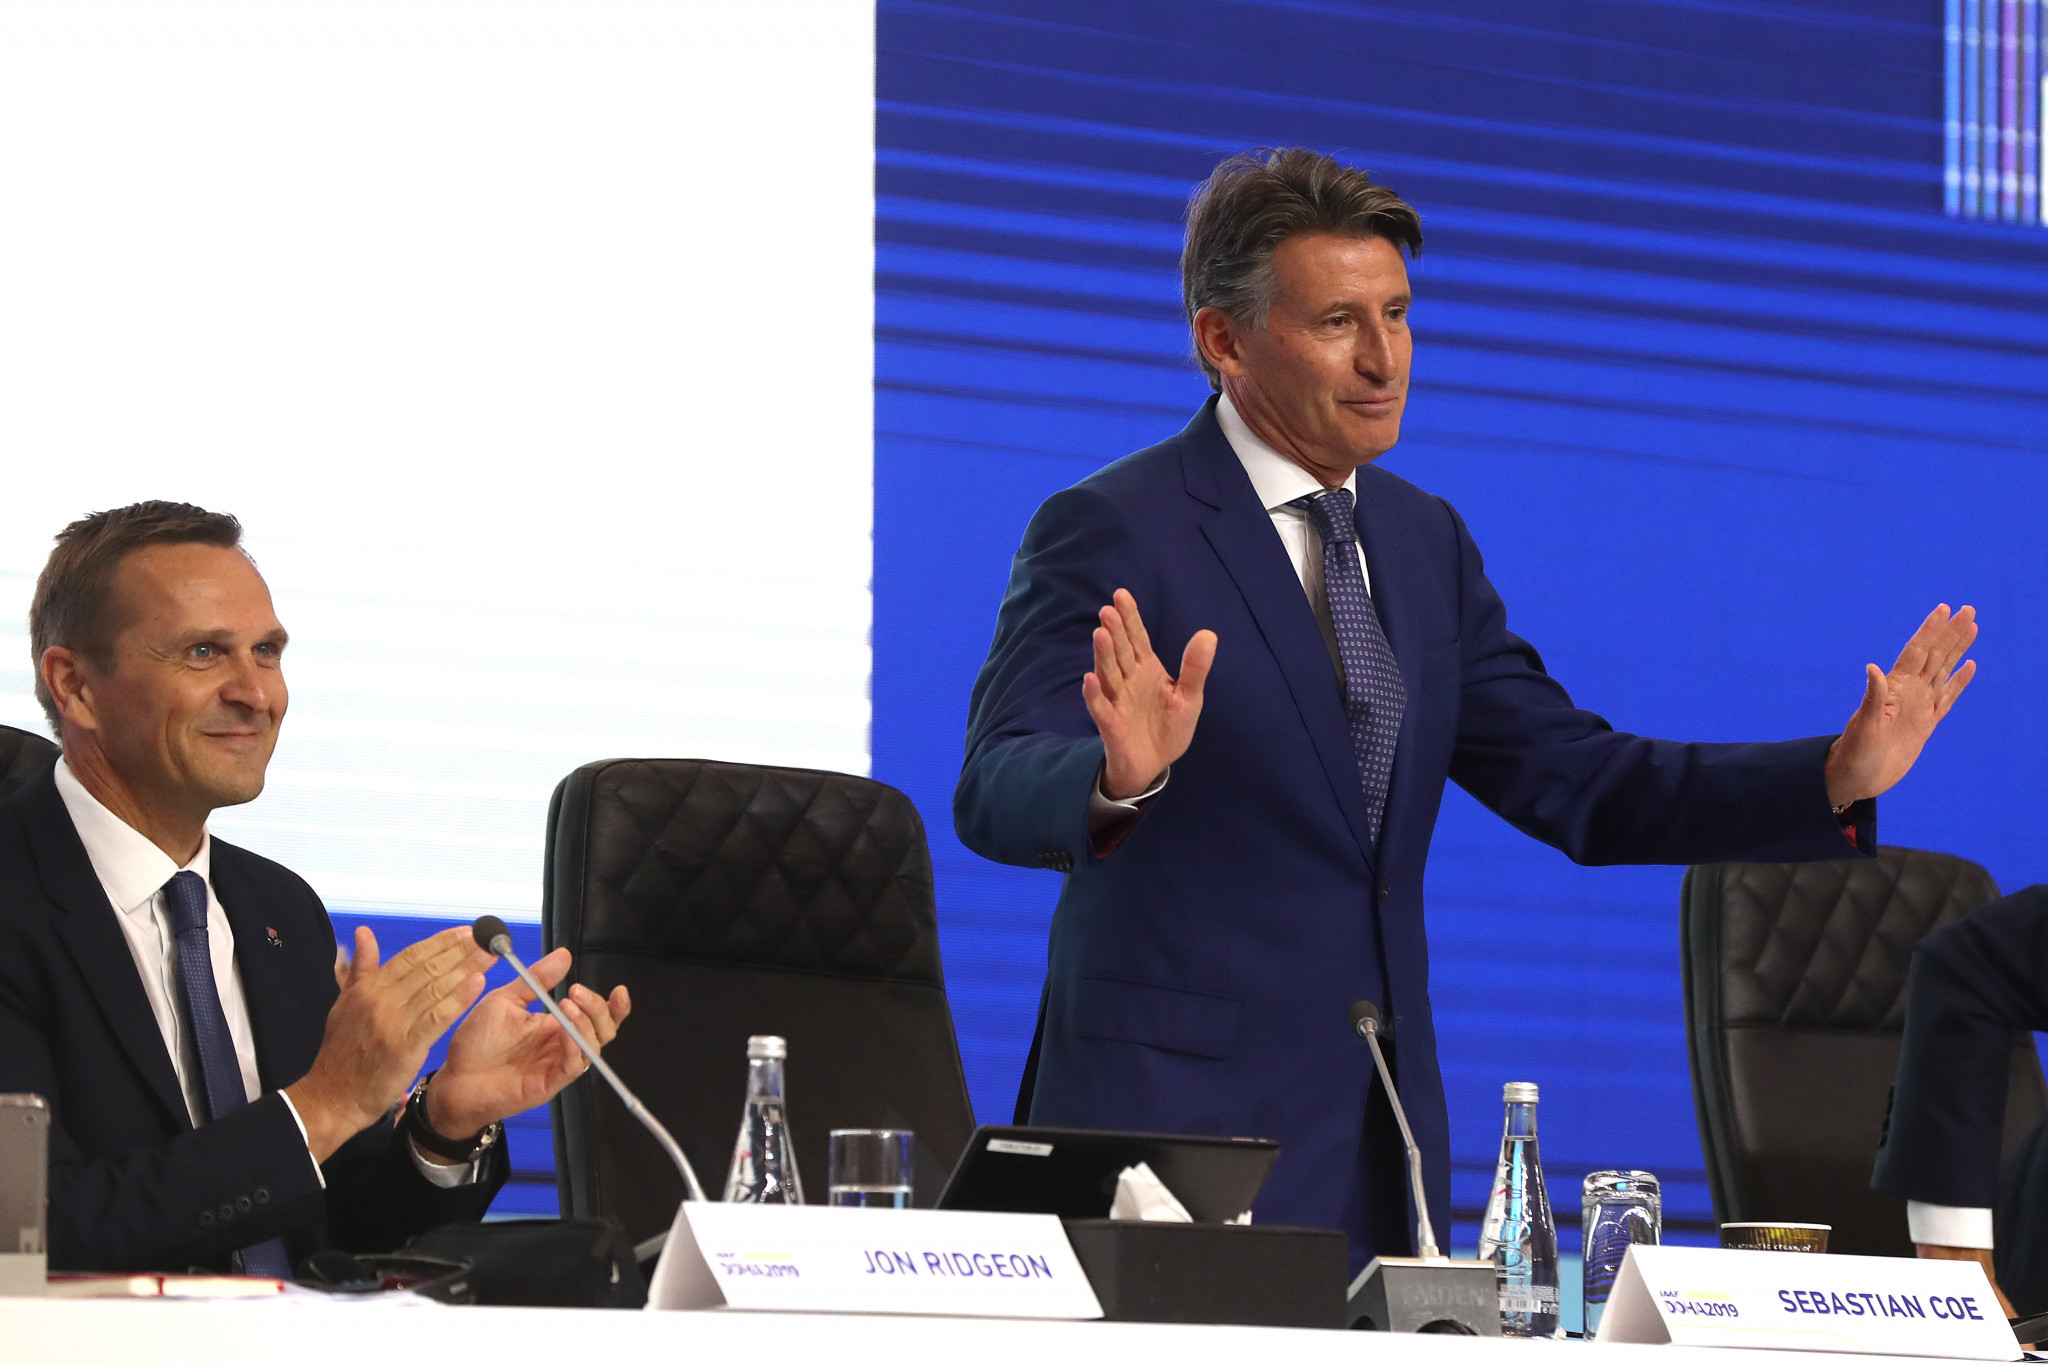 Britain's Sebastian Coe acknowledges the applause of delegates after being re-elected IAAF President ©Getty Images